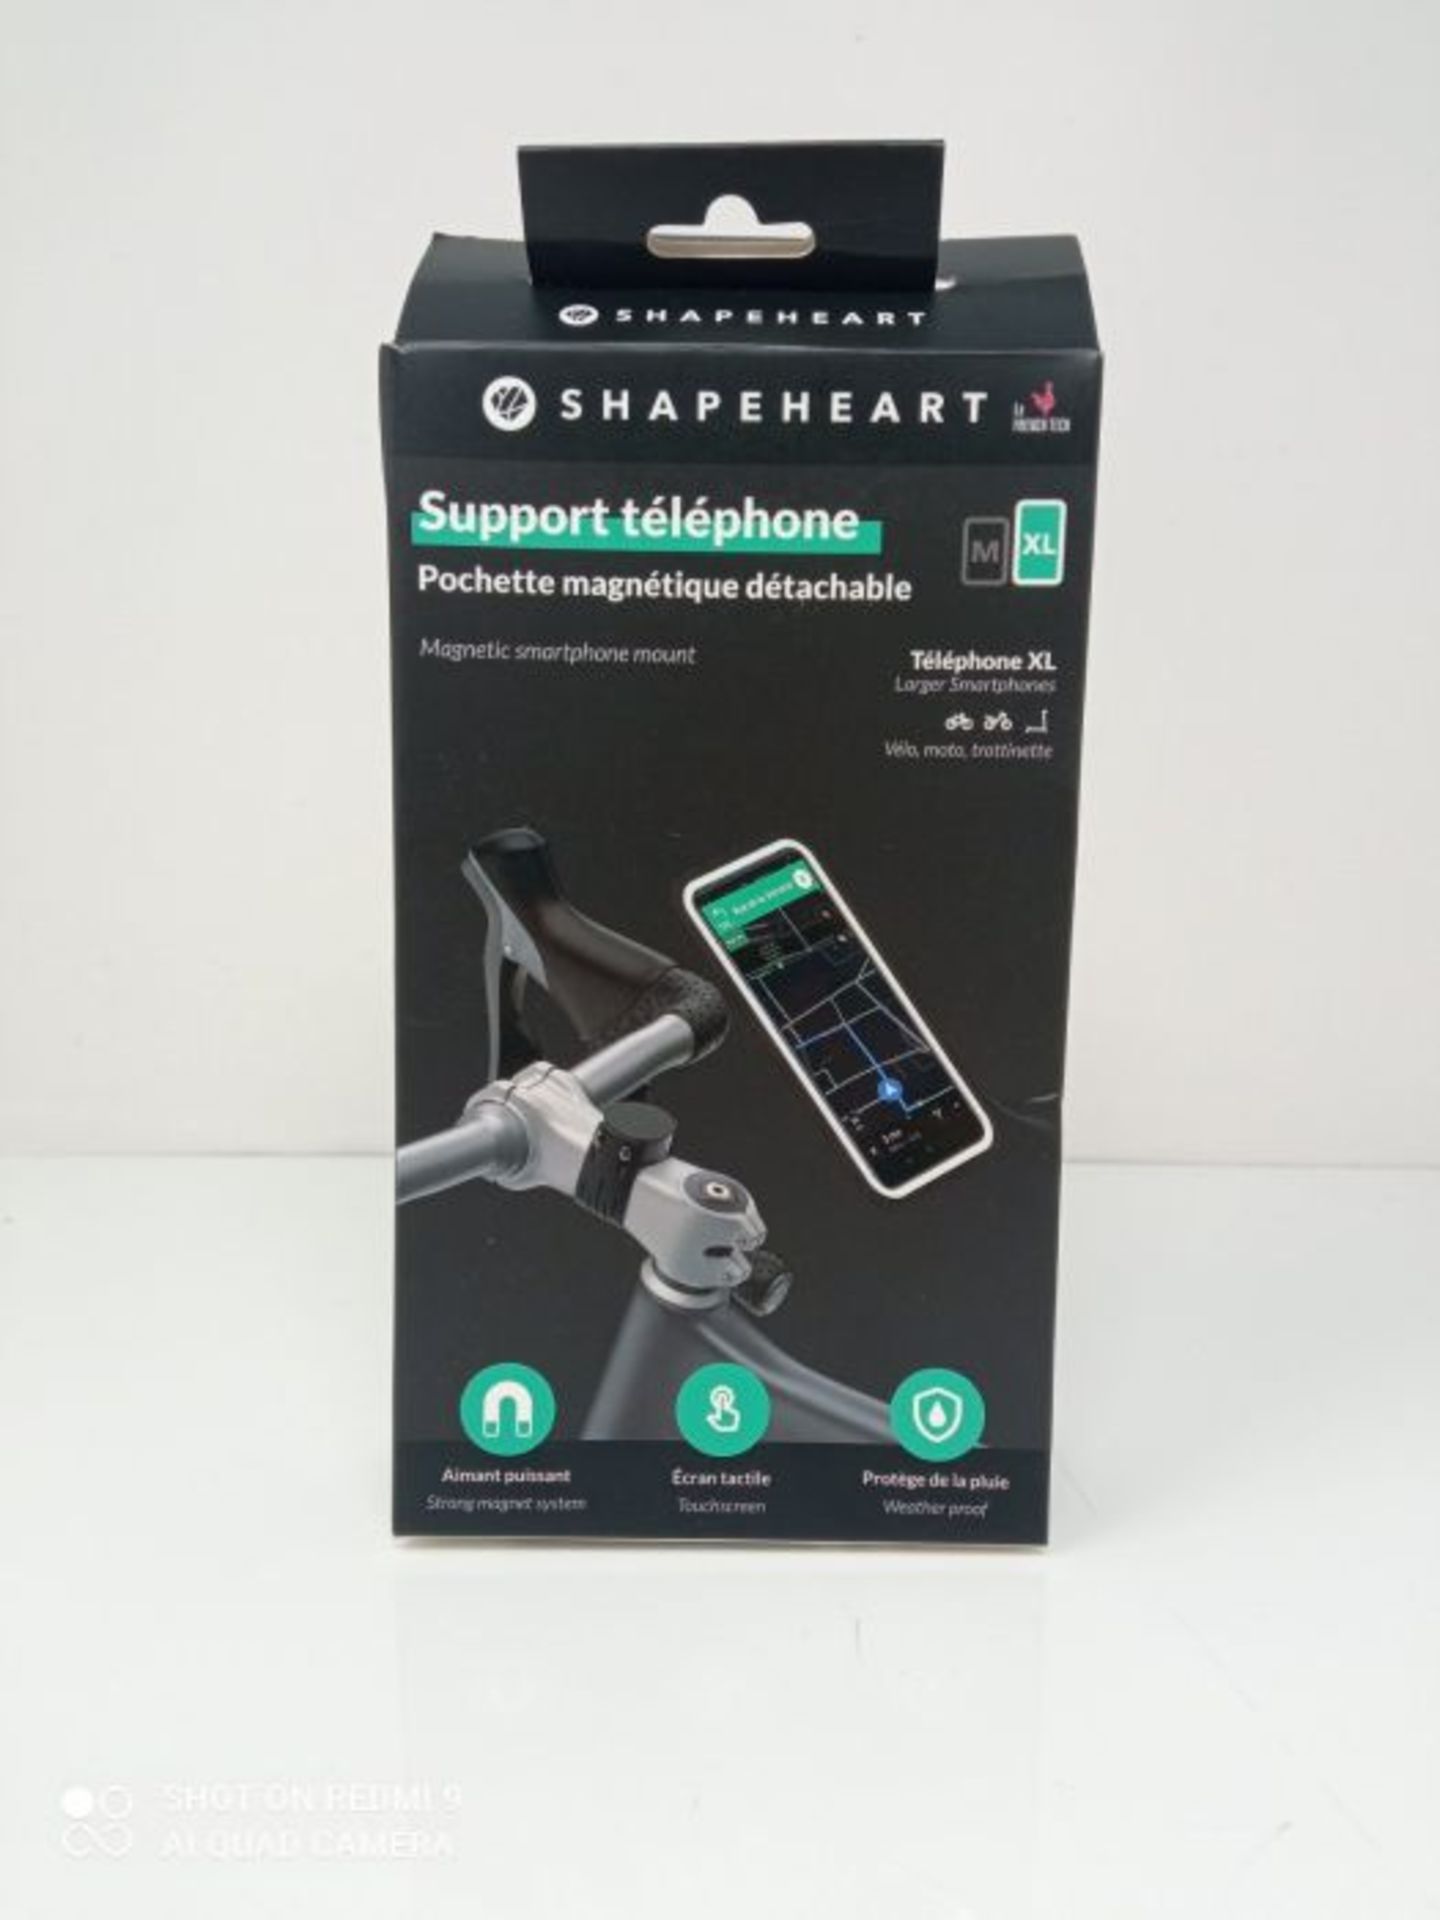 Shapeheart - Magnetic Bike Mount, Phone Holder size XL for Phone up to 16.8 cm, 361574 - Image 2 of 3